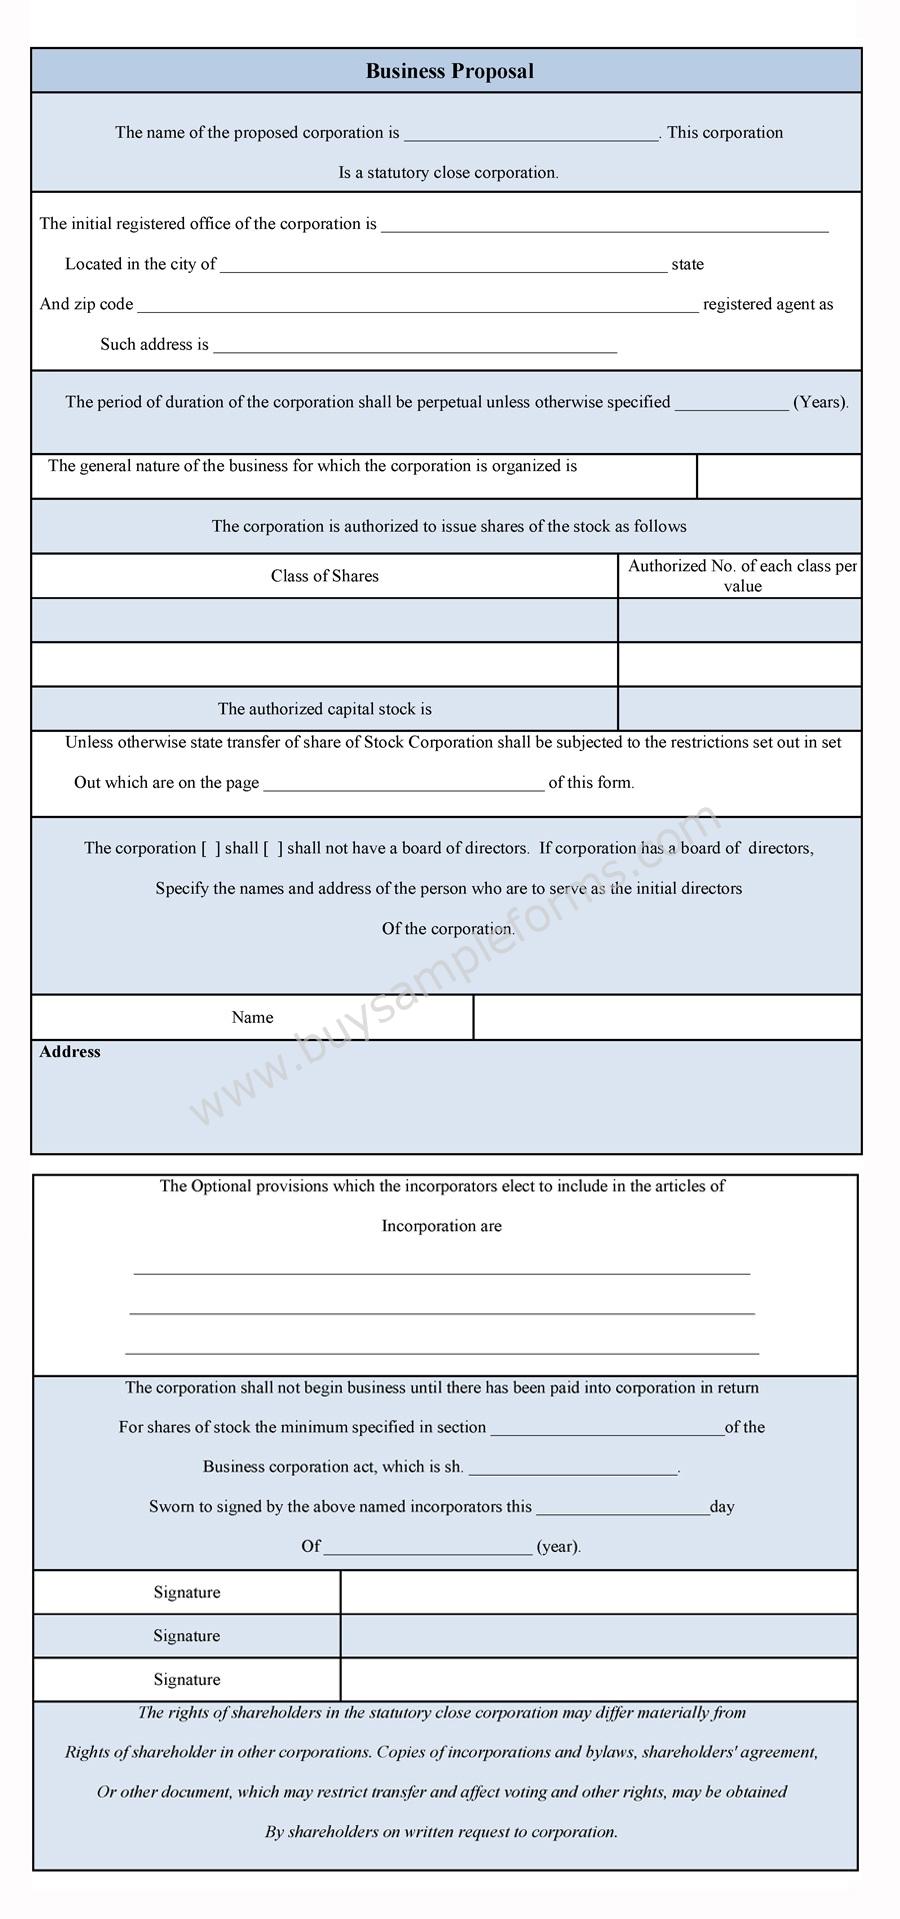 Business Proposal Form Template